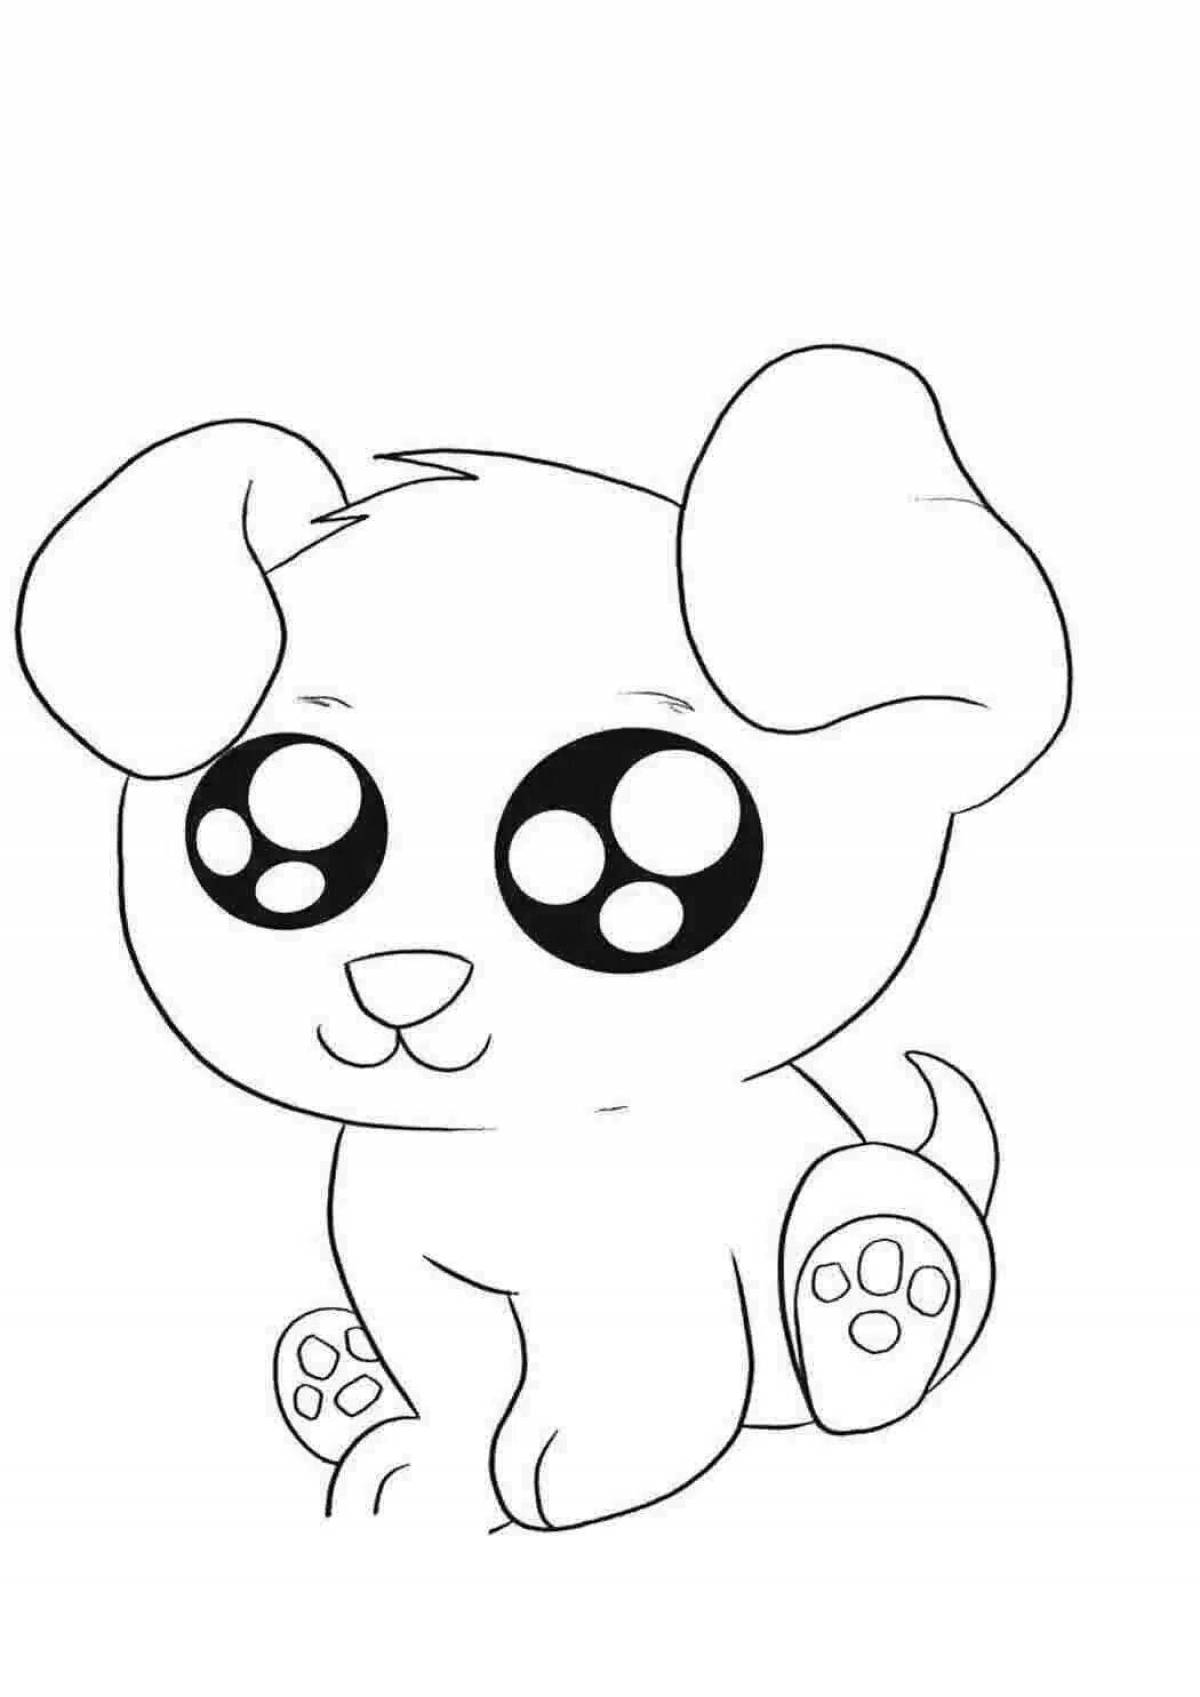 Coloring page naughty cute puppy